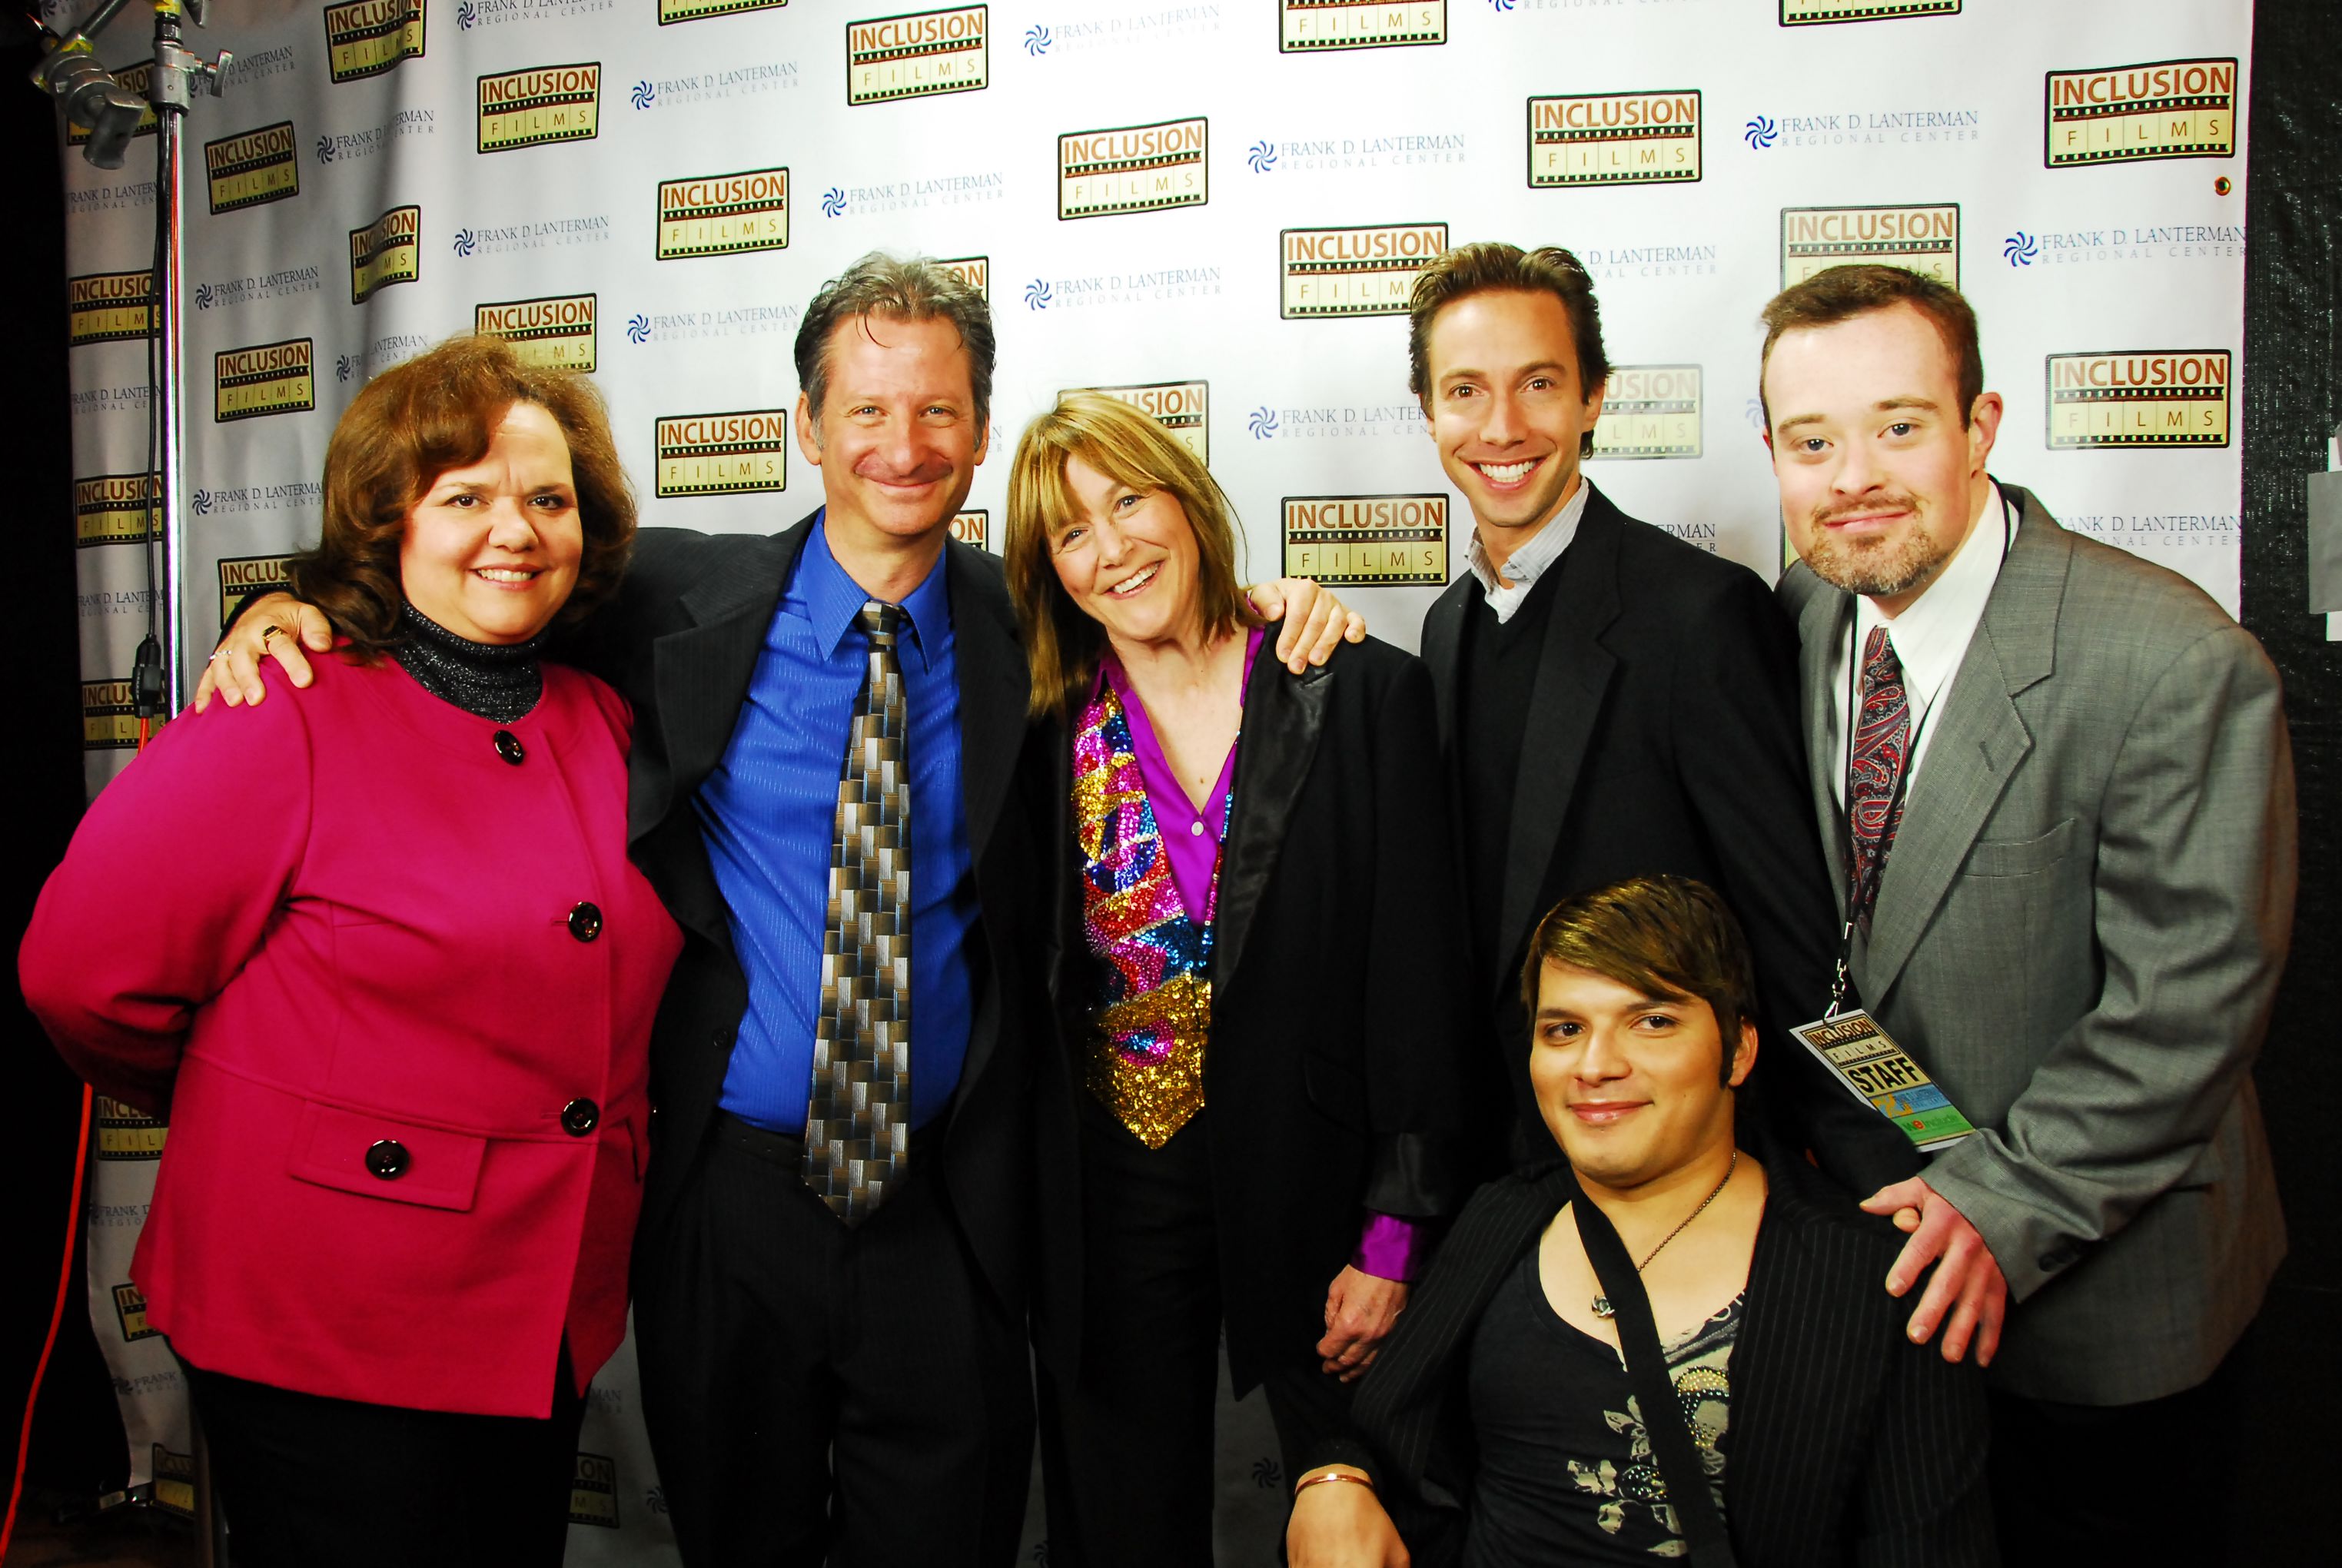 SPUD Premiere at the Academy of Television Arts and Sciences. Gloria Castaneda, David Zimmerman, Geri Jewell, Jonah Blechman, Andy Arias, Kevin Ewing. March 4, 2010